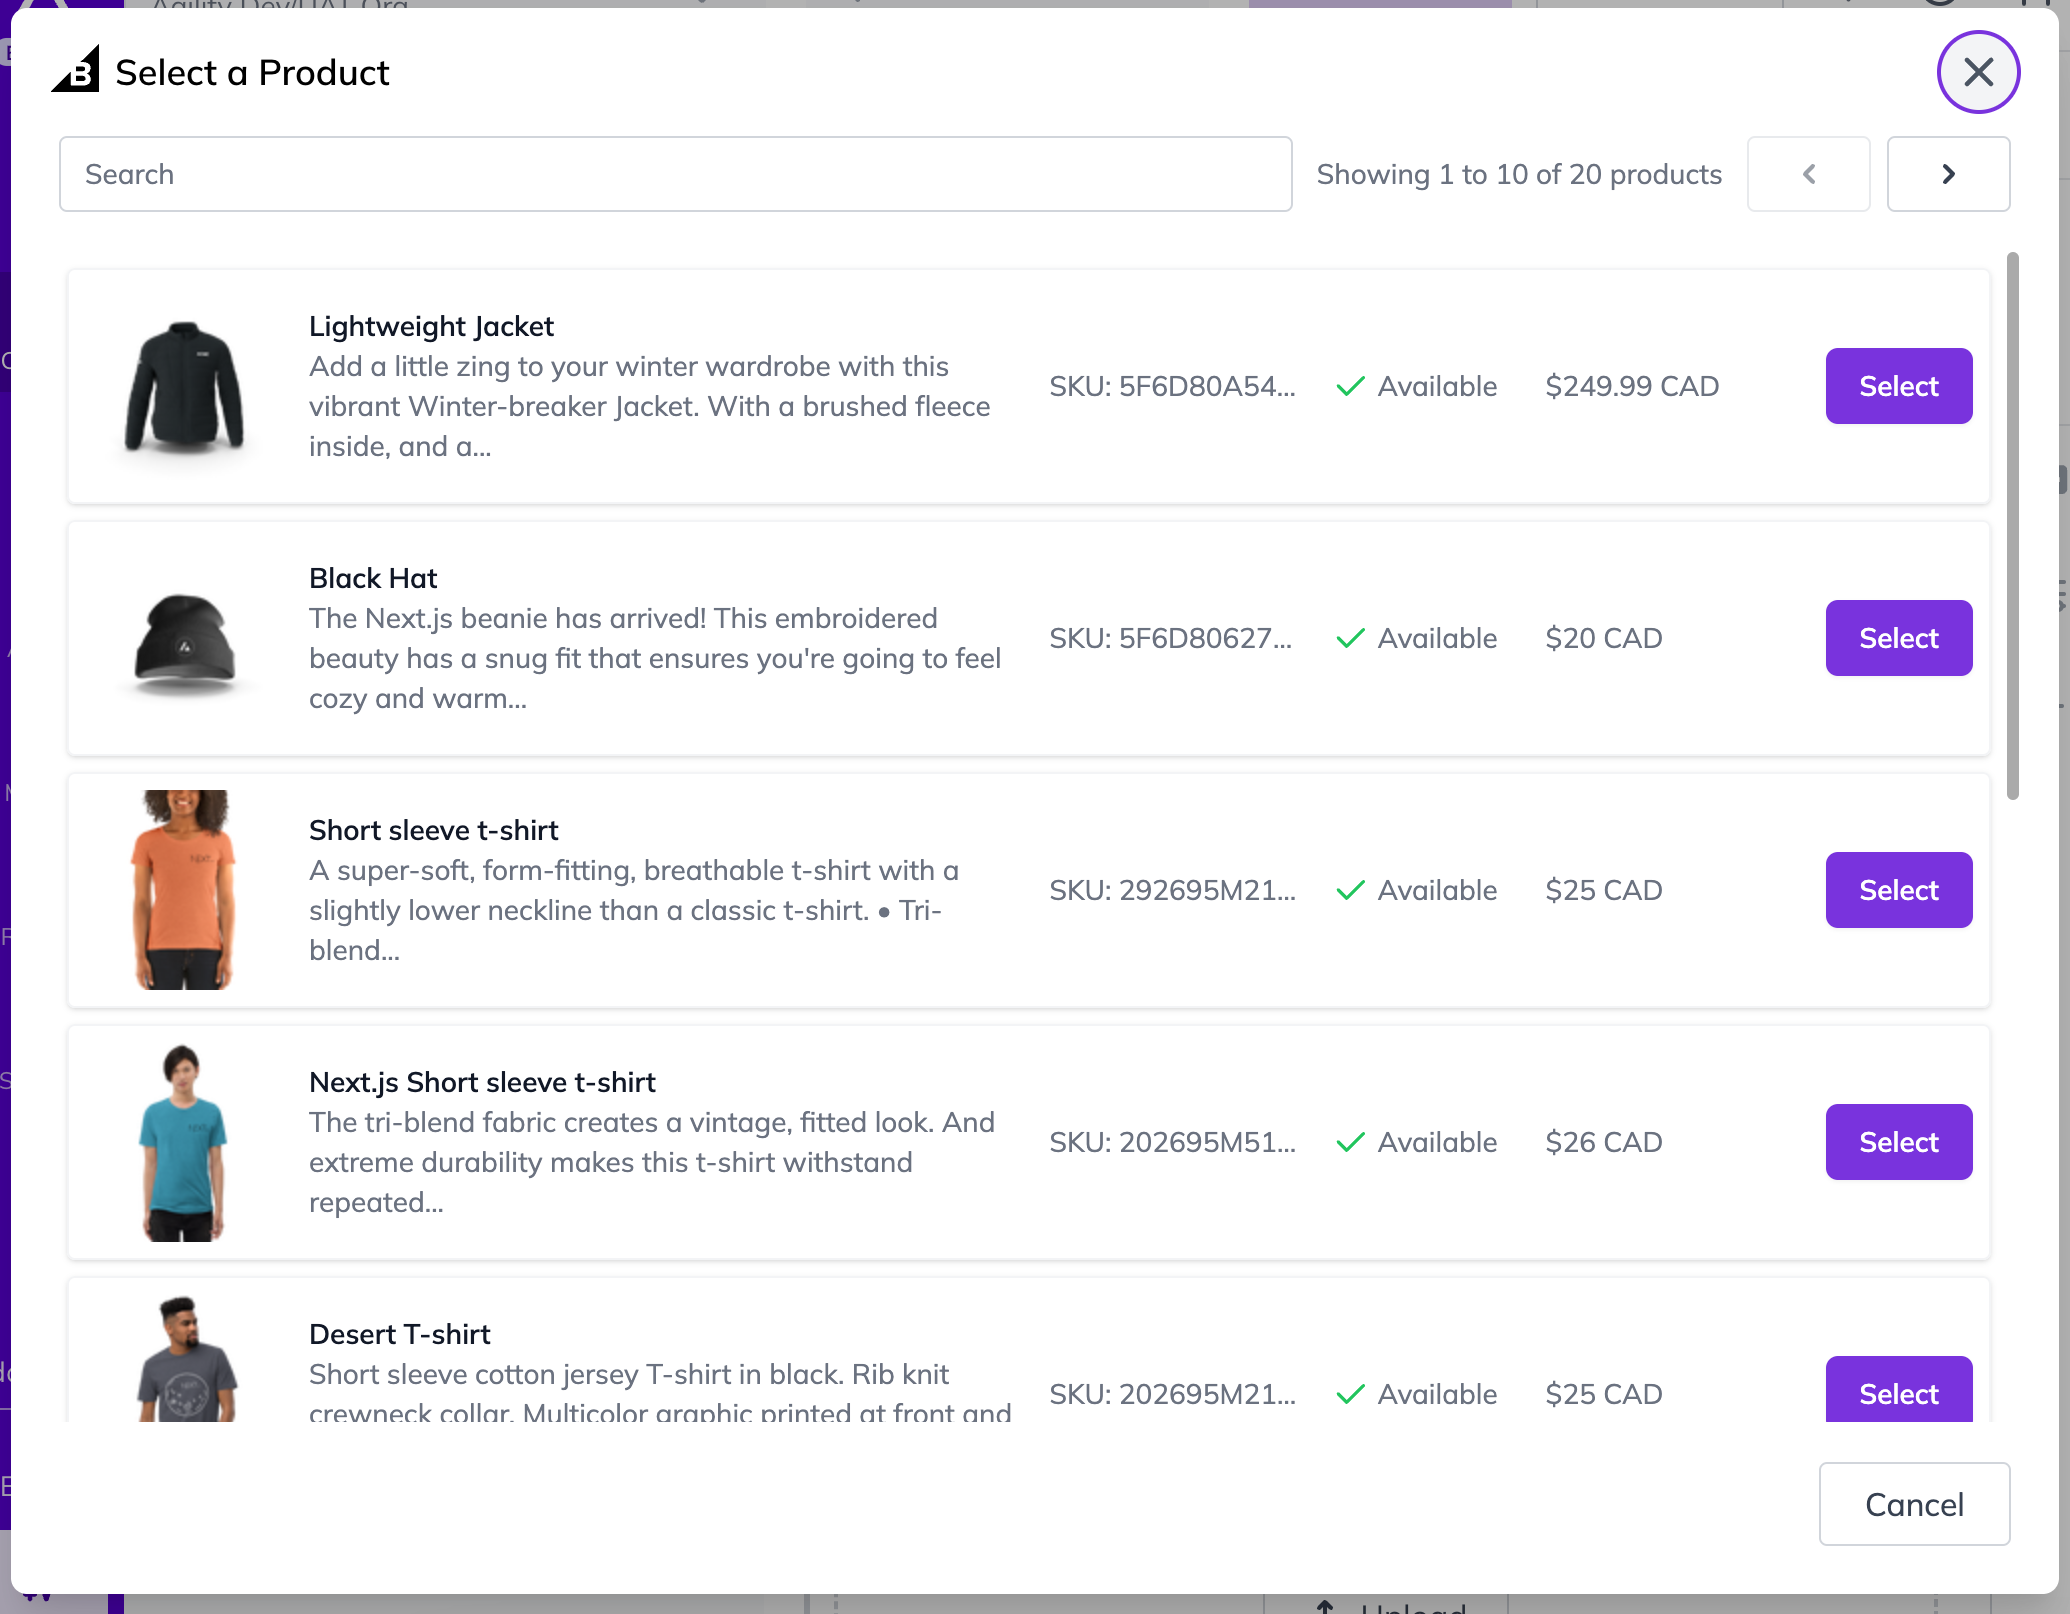 Product Selection Modal